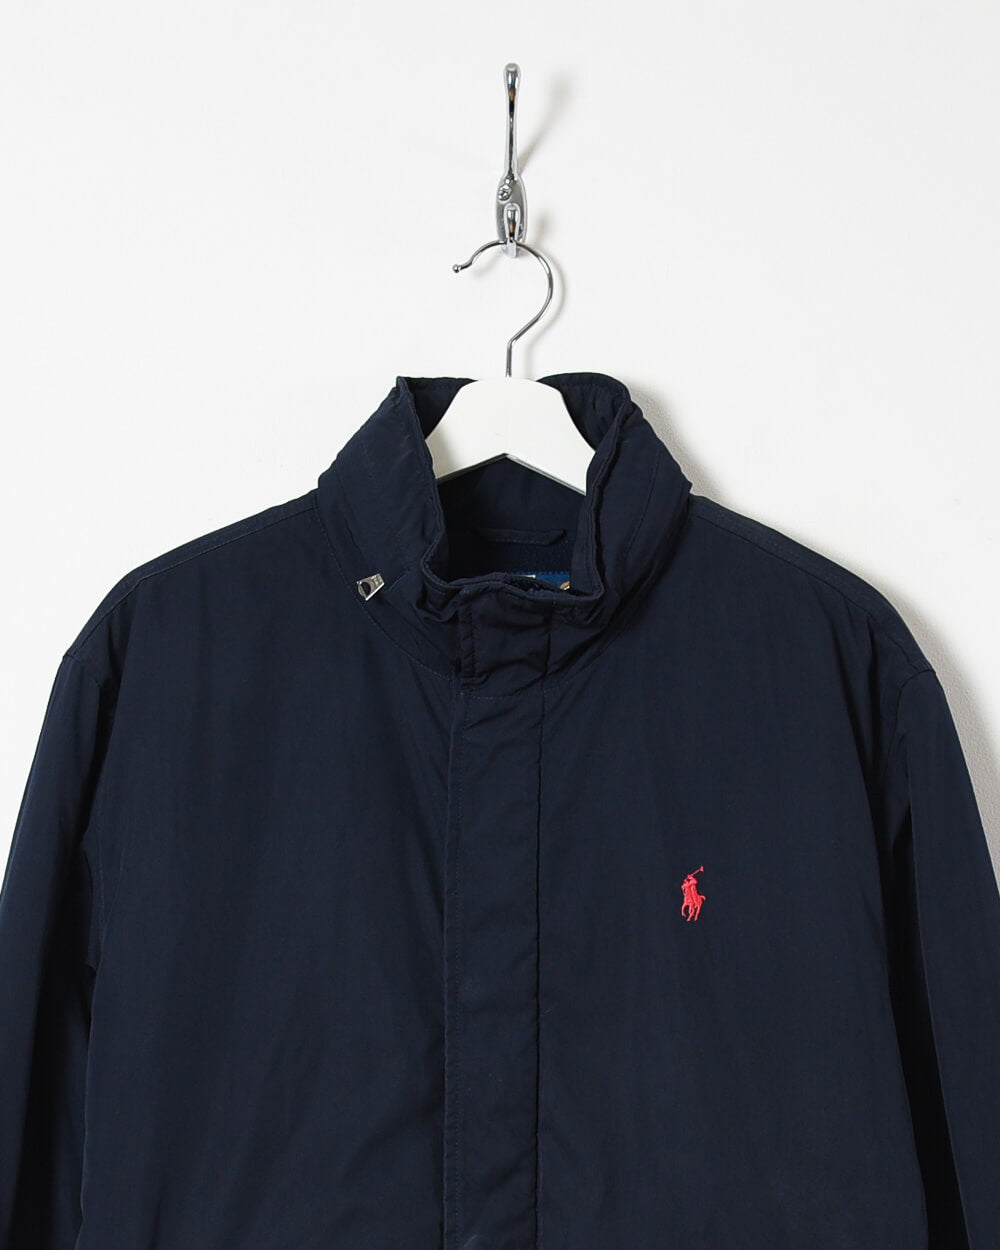 Ralph Lauren Fleece Lined Jacket - Large - Domno Vintage 90s, 80s, 00s Retro and Vintage Clothing 